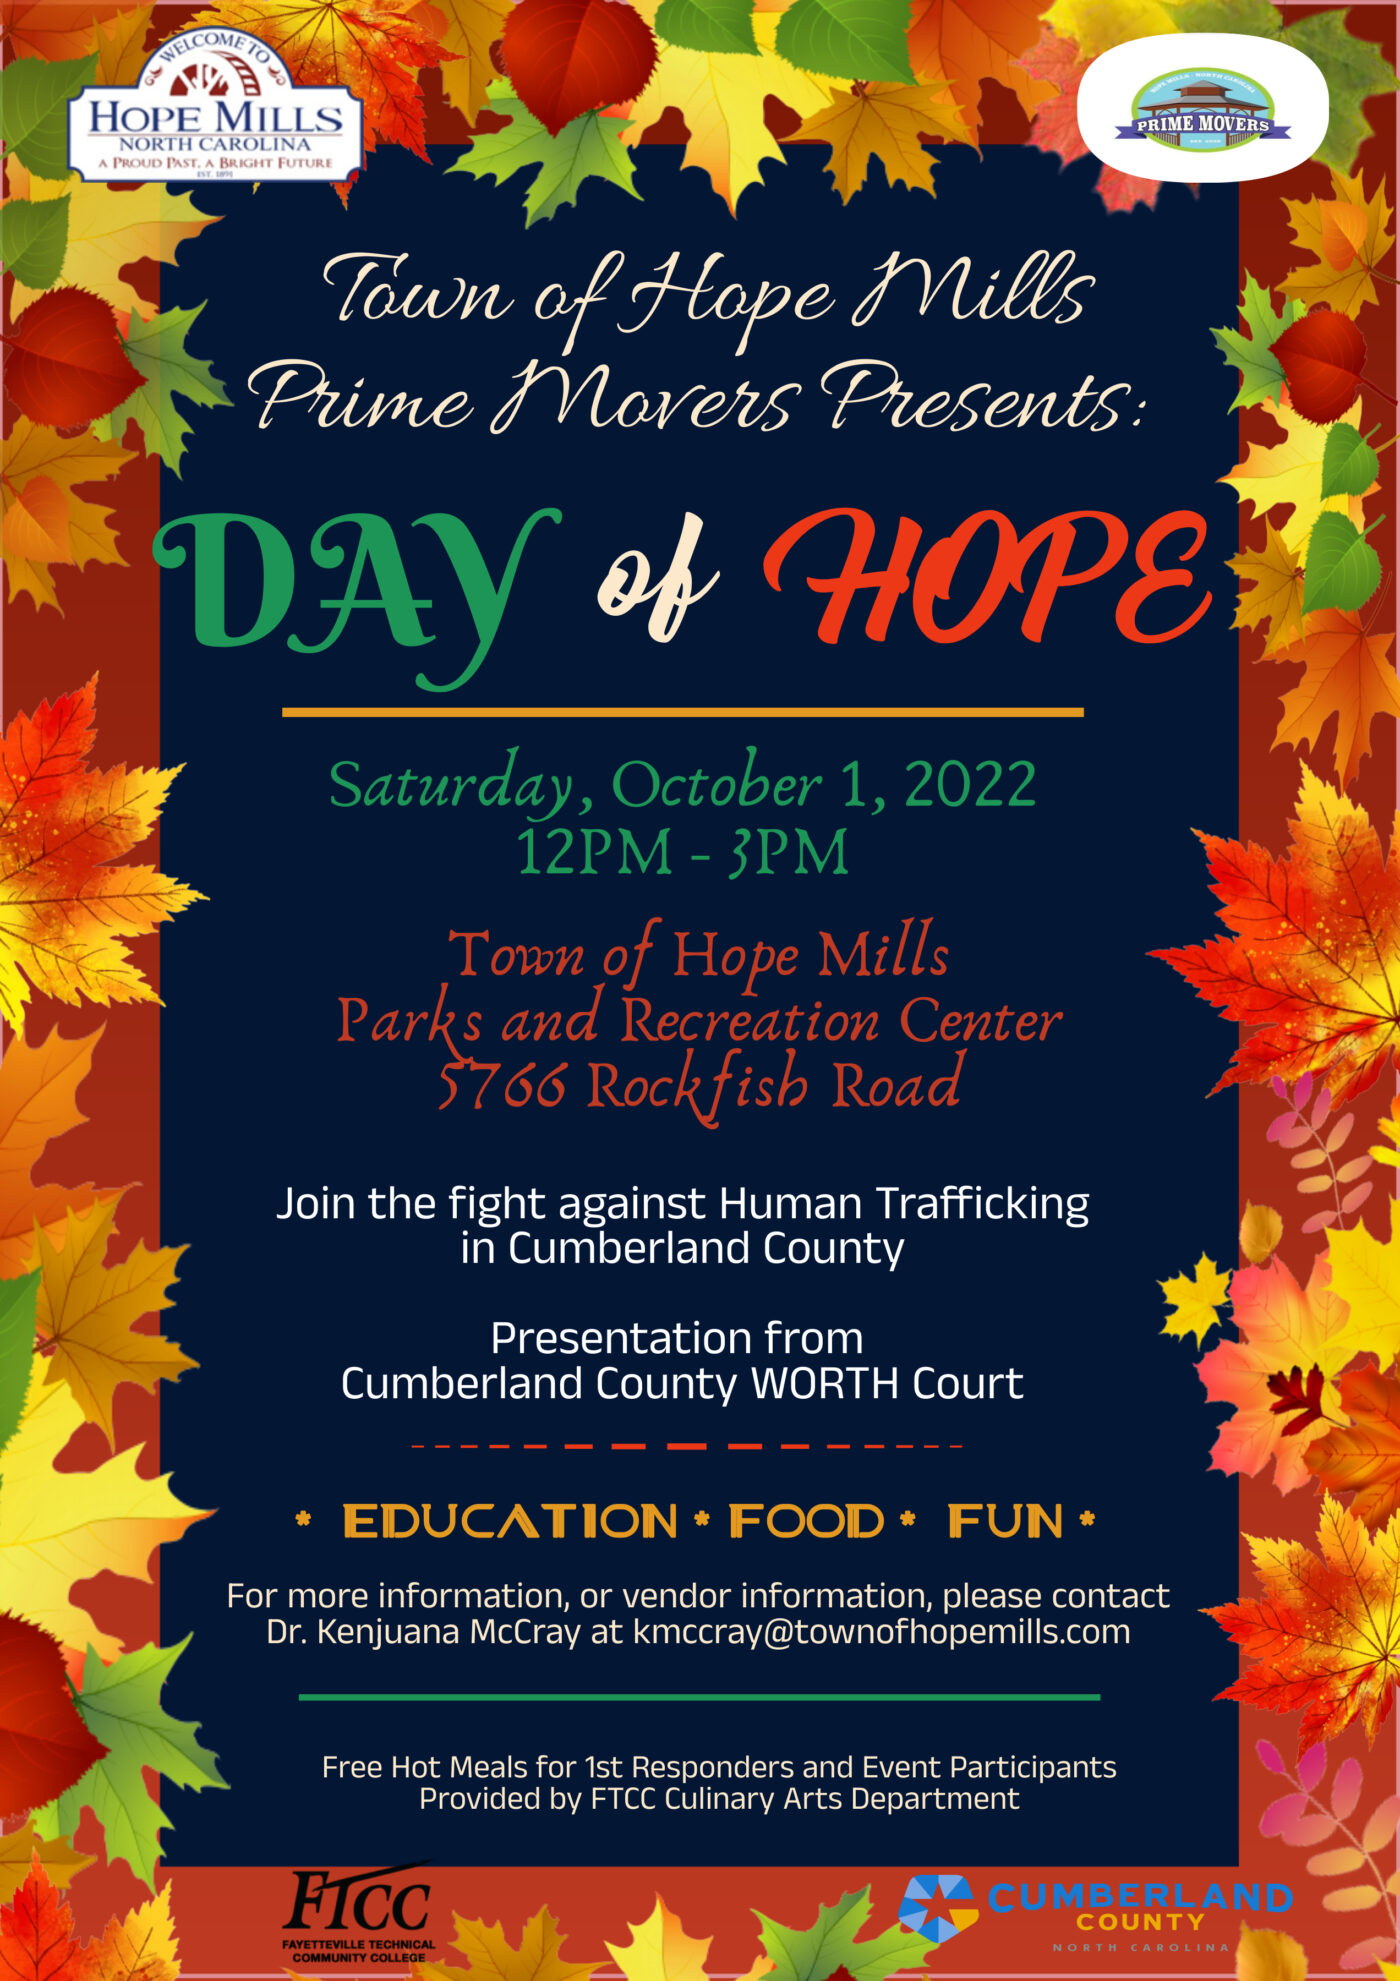 *POSTPONED* Day of Hope Join the fight against human trafficking in